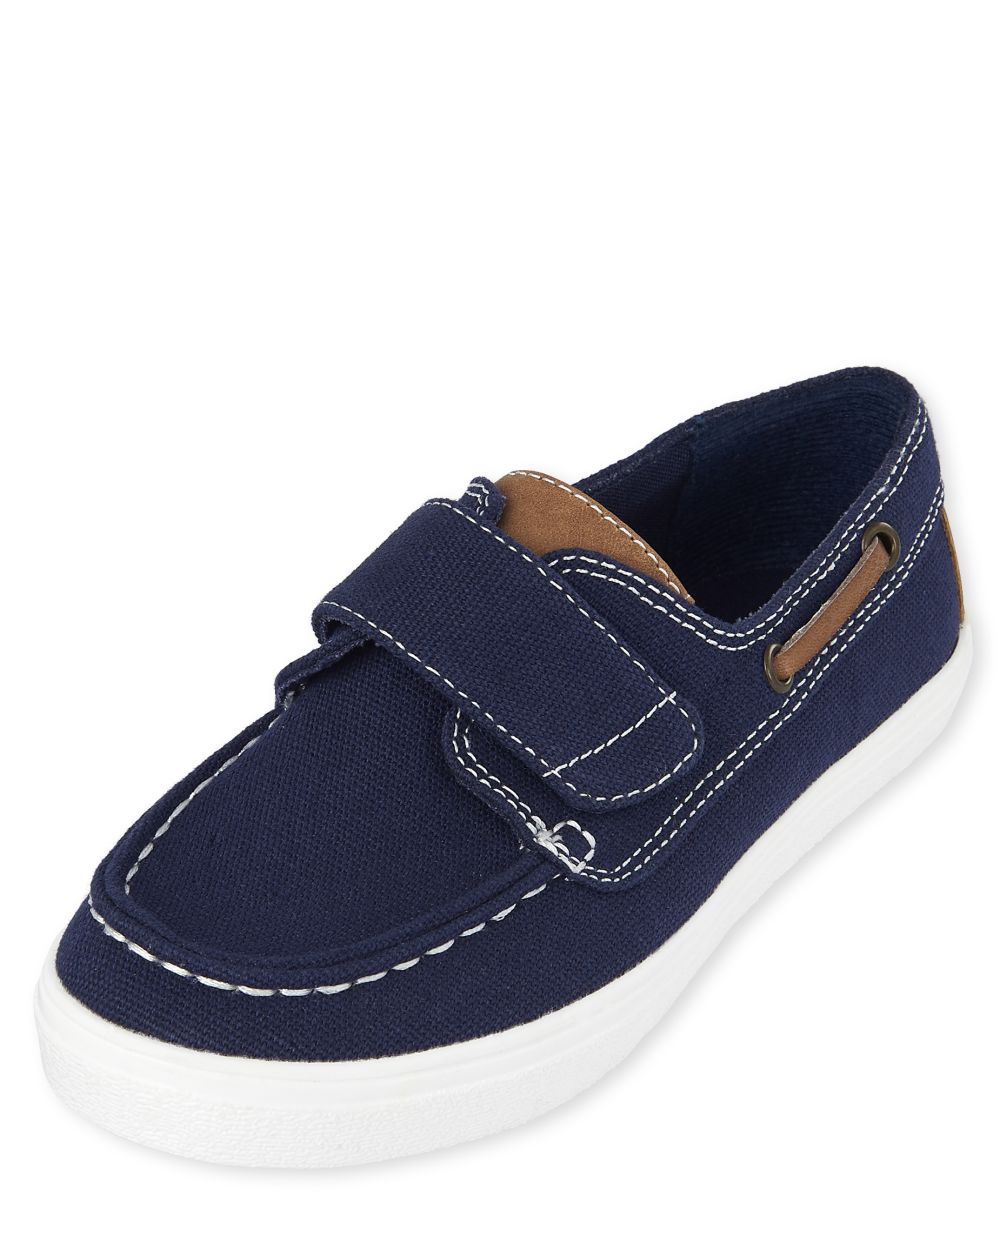 Boys Easter Matching Boat Shoes